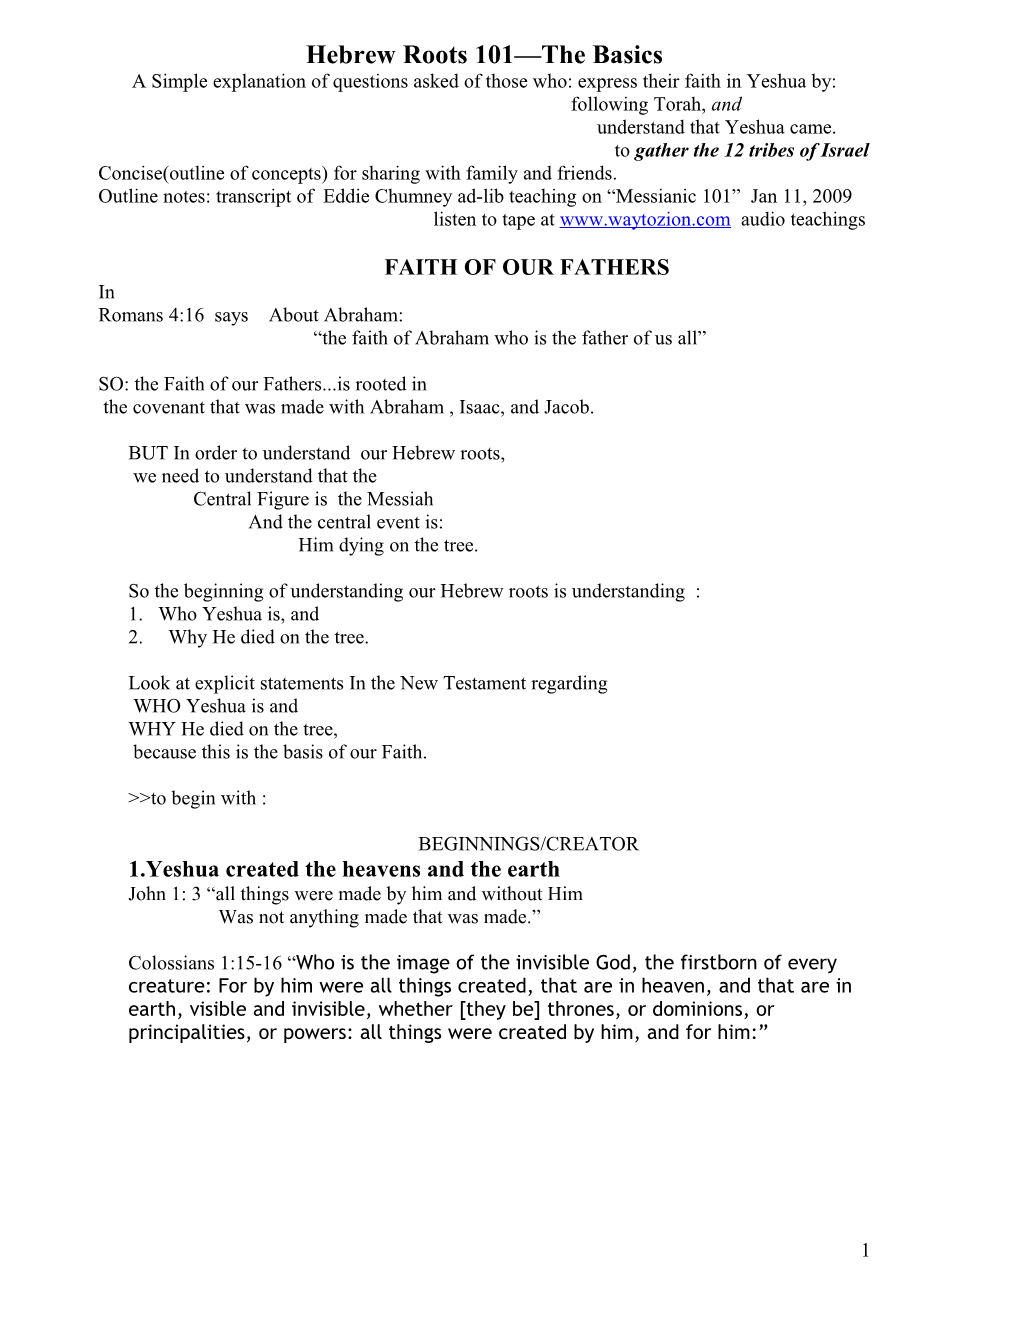 Outline Notes: Eddie Chumney On “Messianic 101” Jan 11, 2009